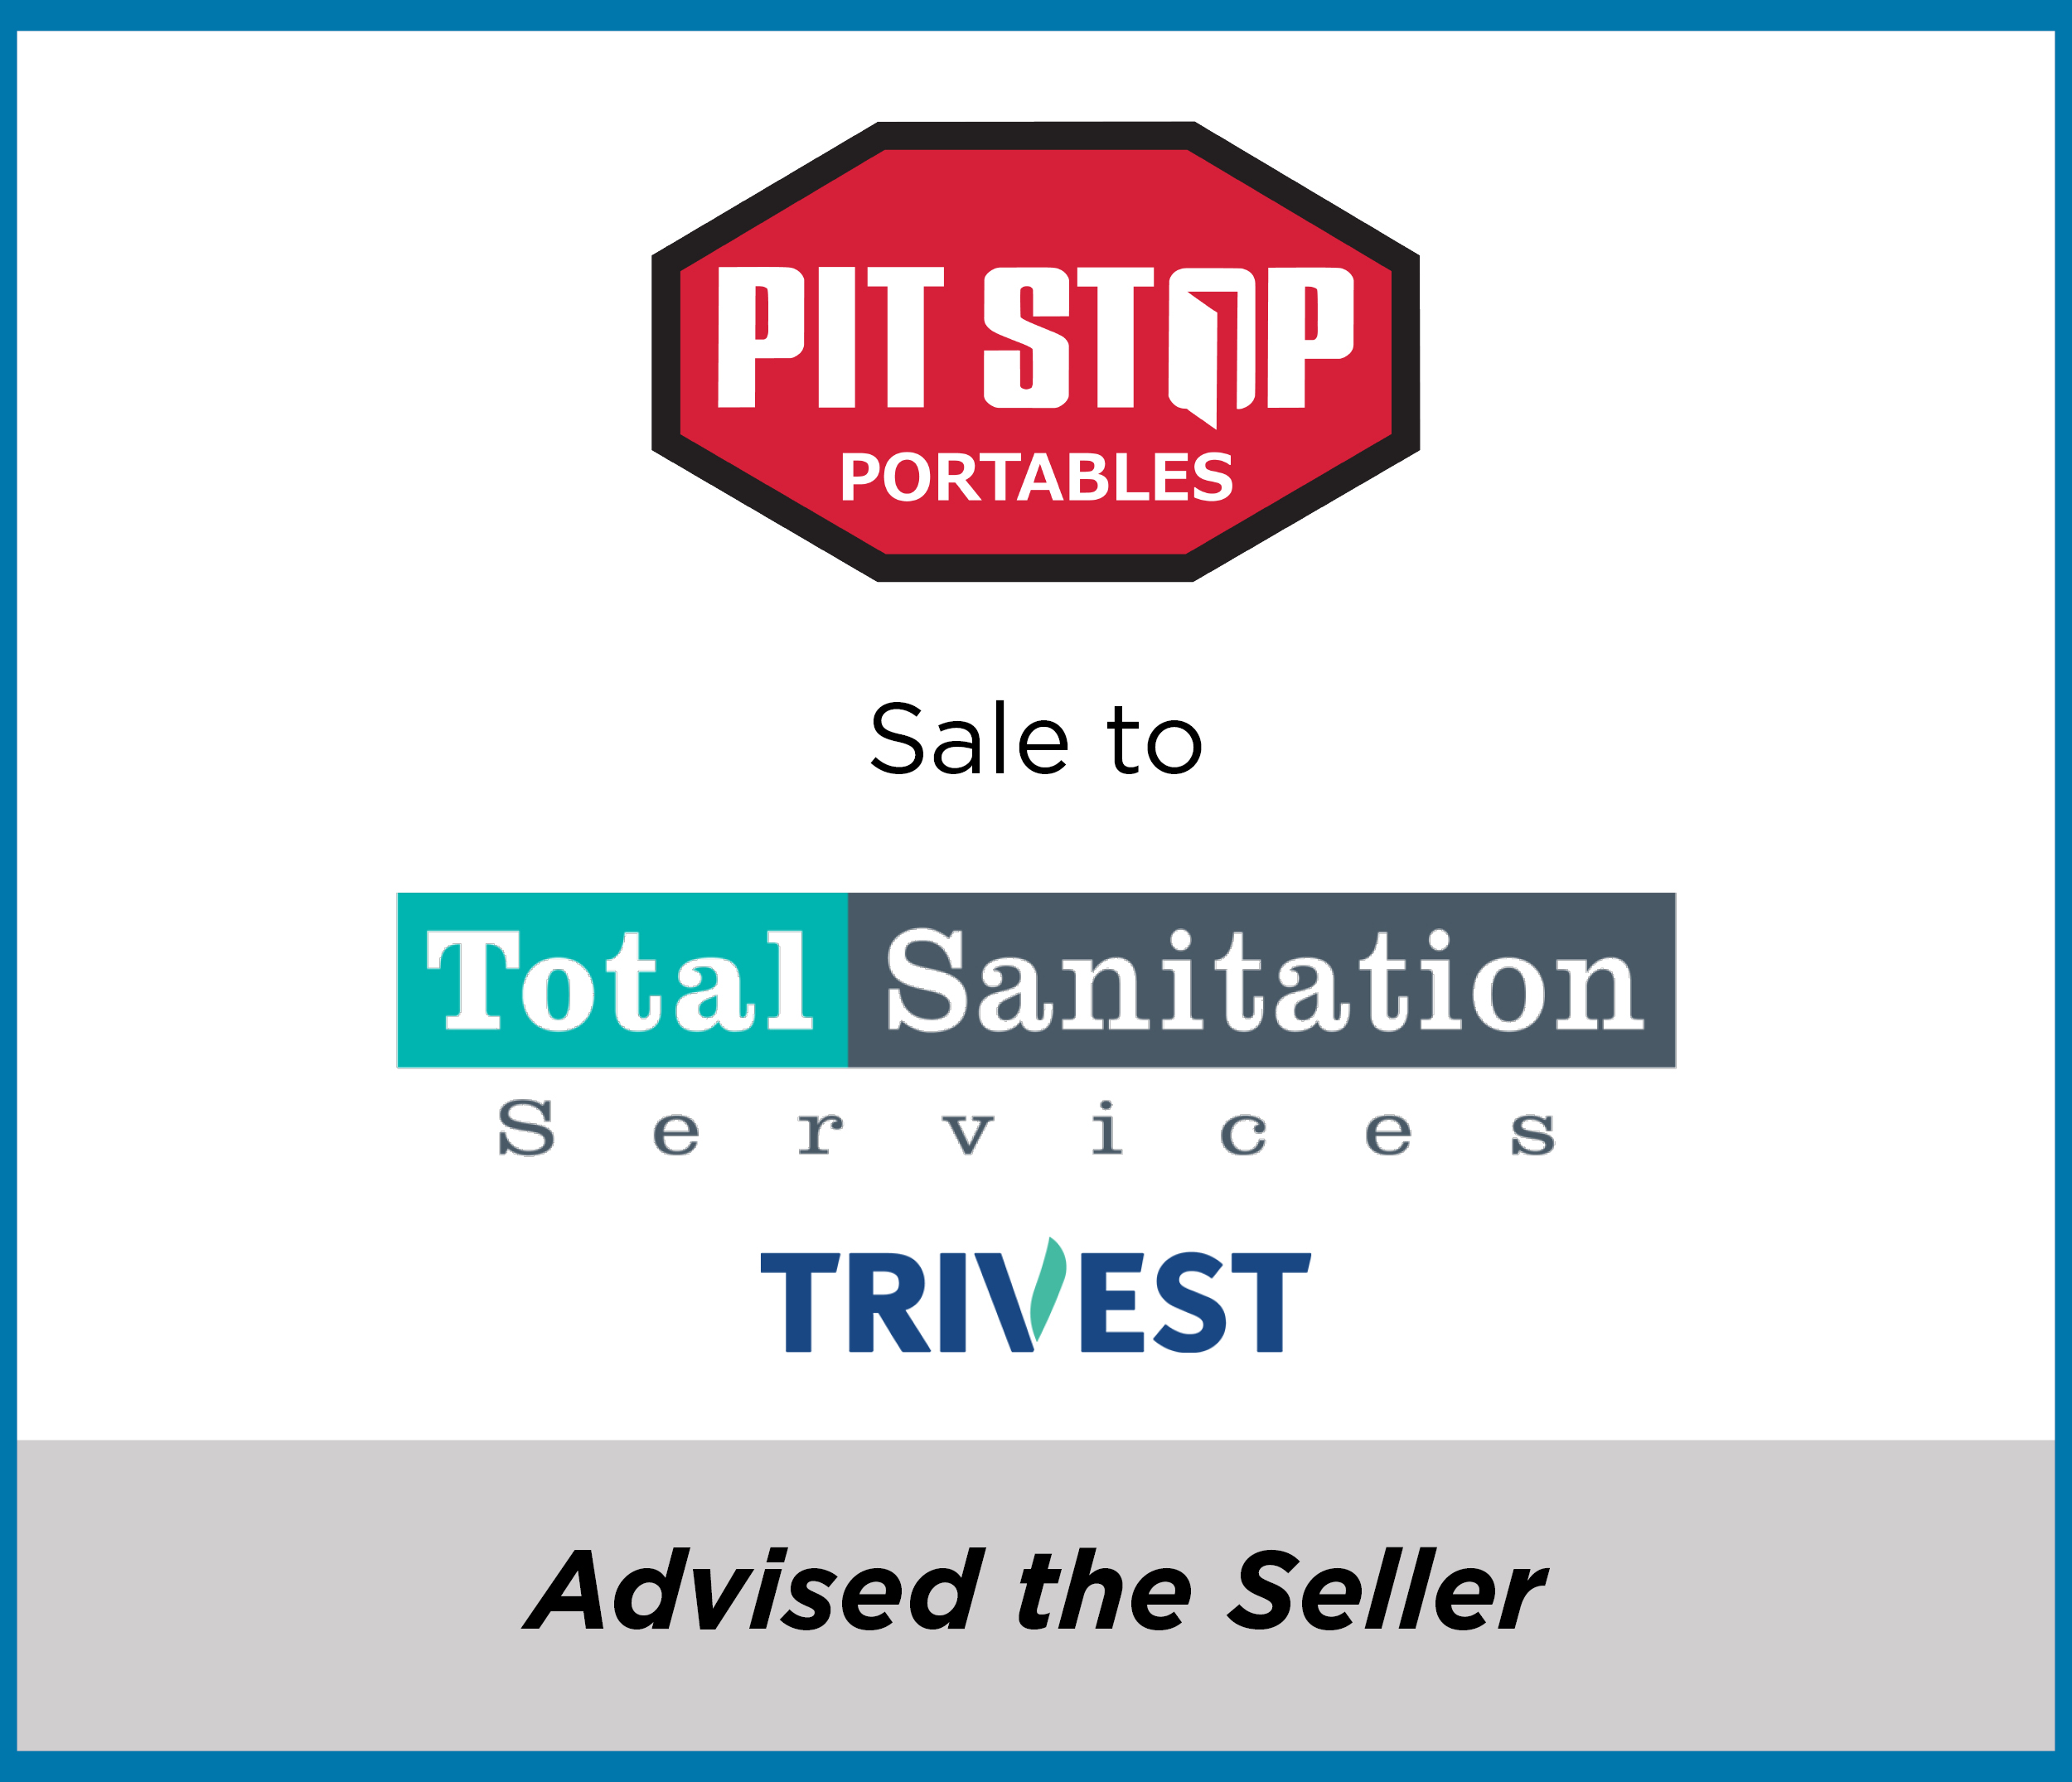 Pit Stop Portables sale to Total Sanitation Services, a Trivest Portfolio Company | Capital West Partners - Western Canada's Trusted M&A Advisors